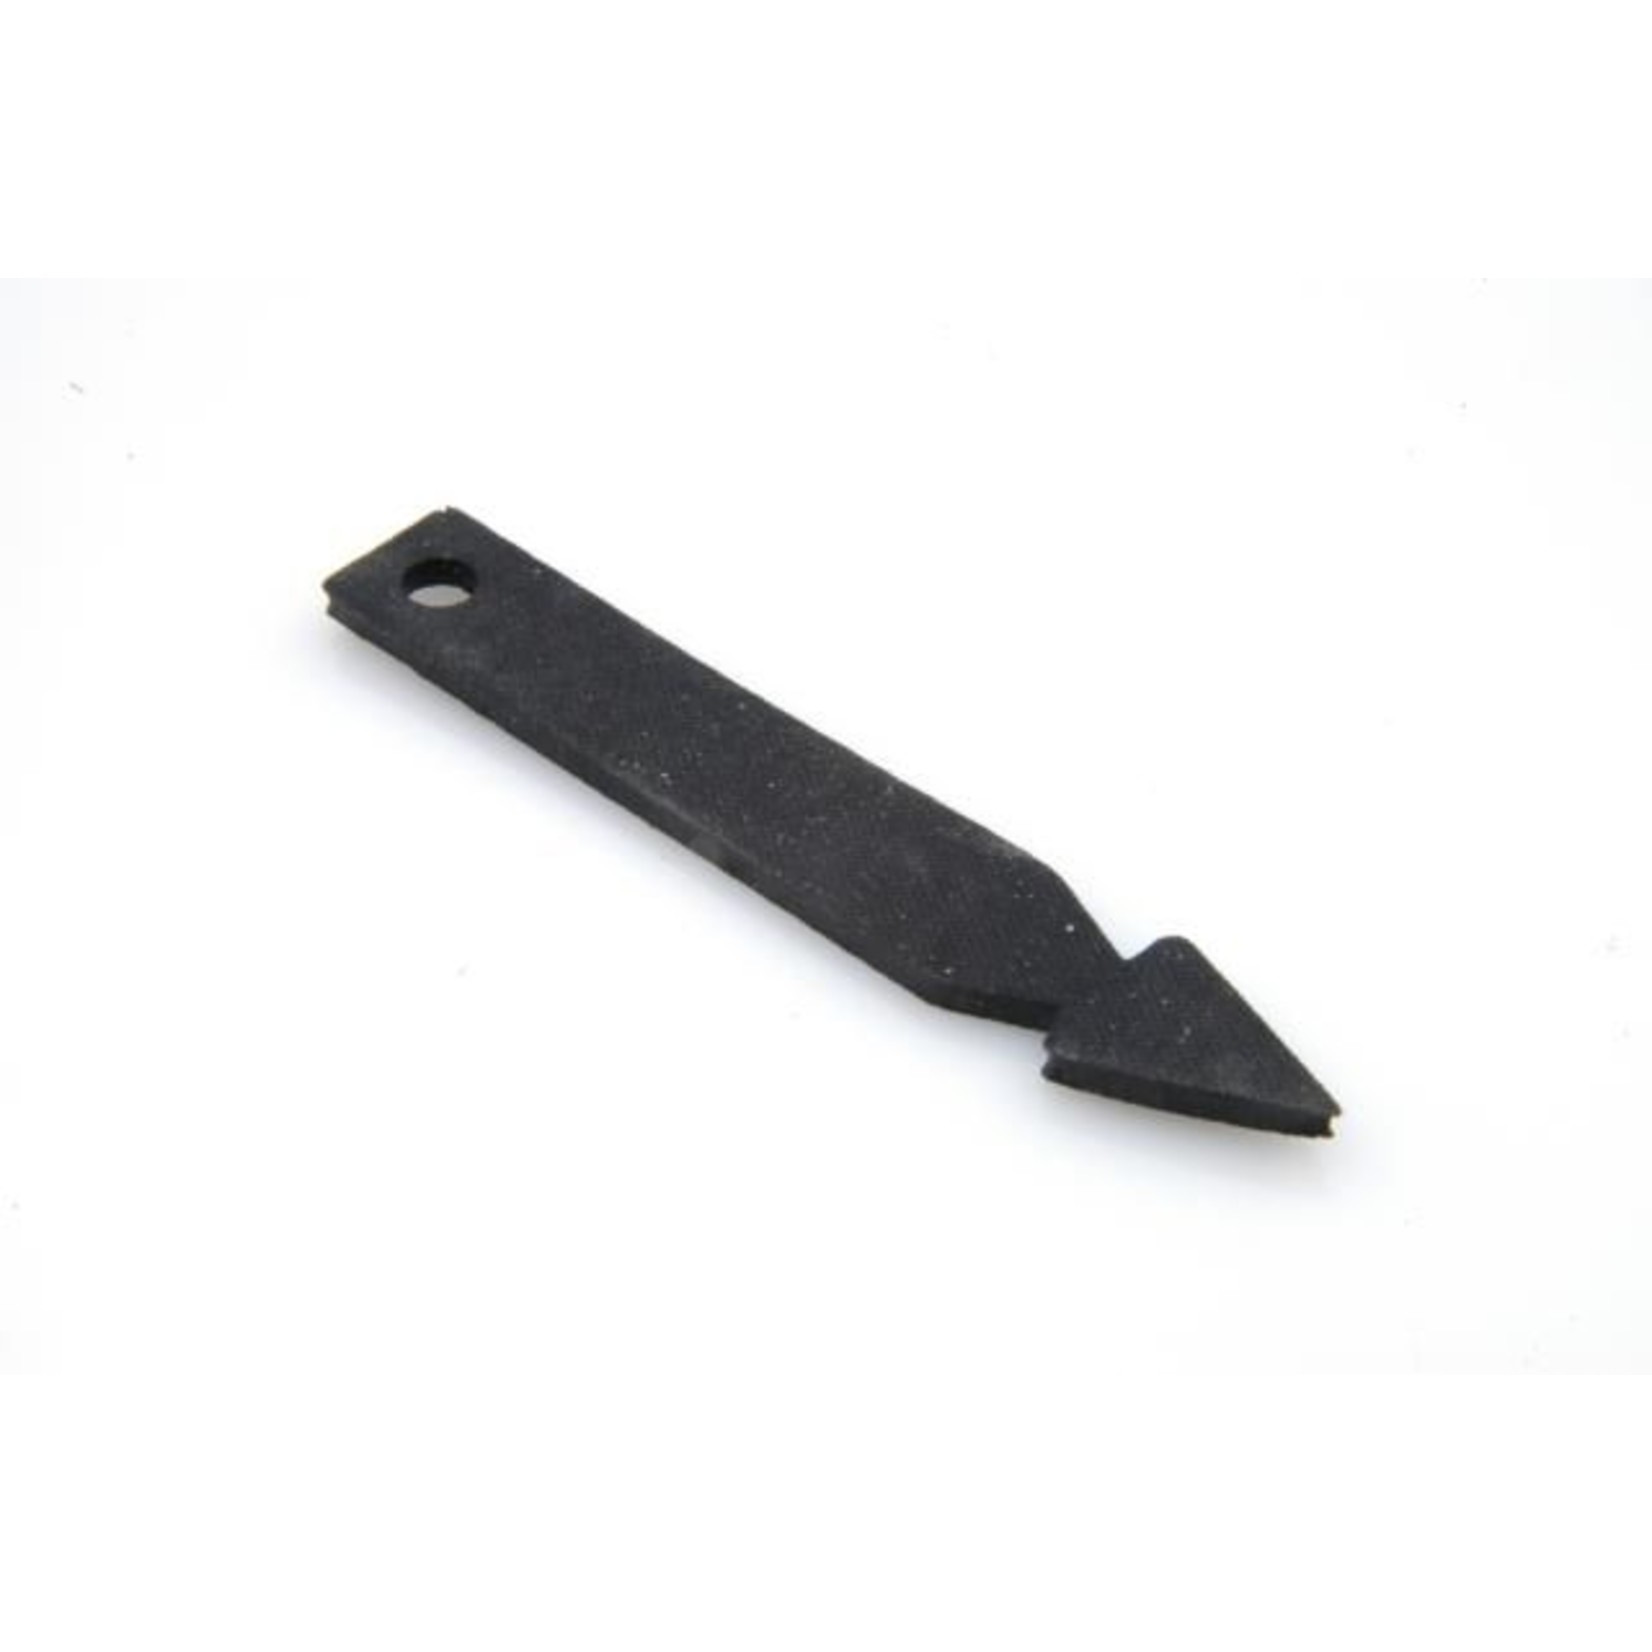 Rubber tie-wrap 77 x 12mm Nr Org: 5413292